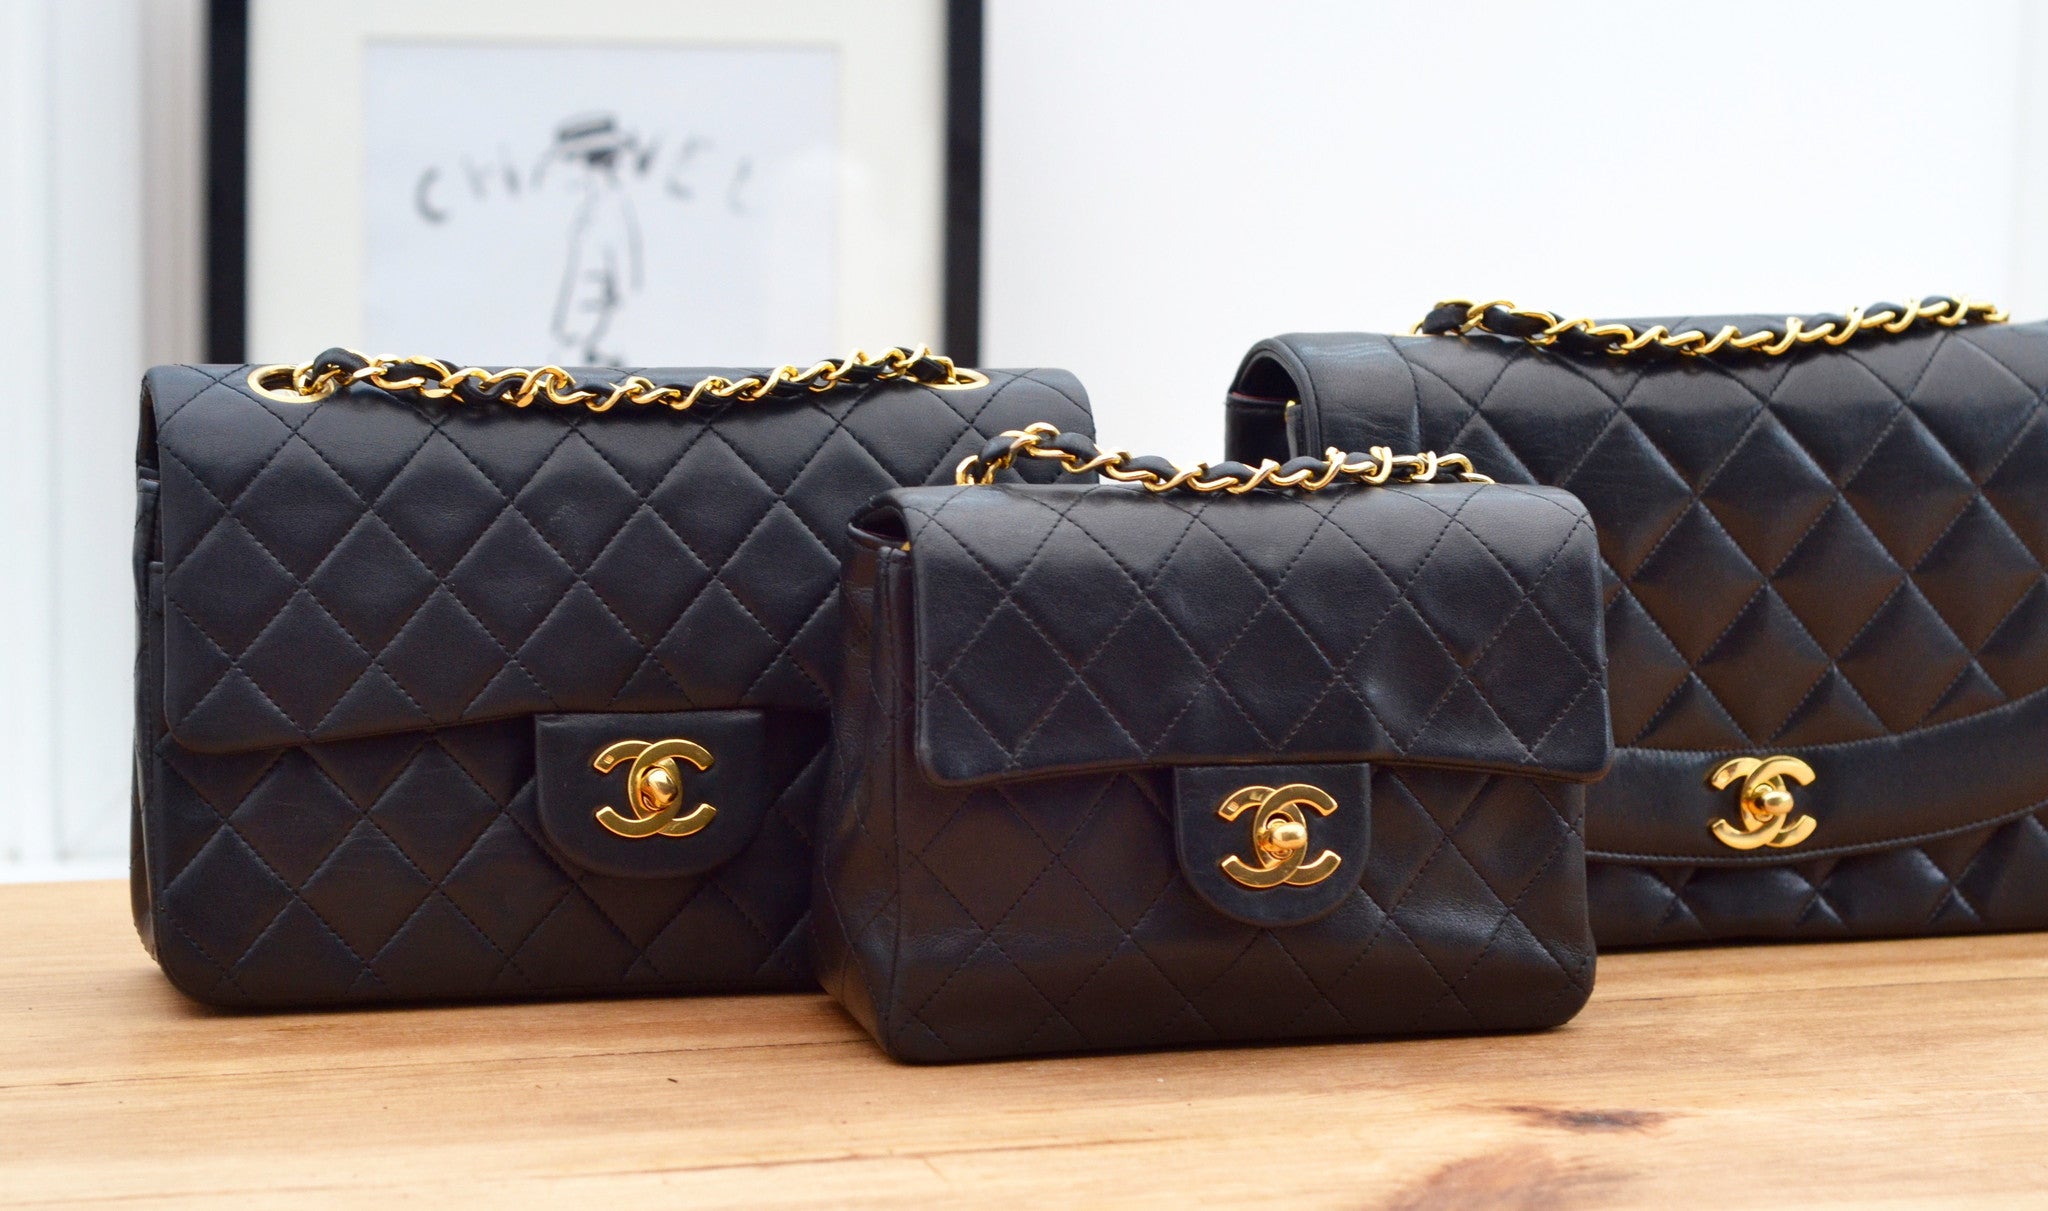 The insider&#39;s guide to buying vintage Chanel 2.55 bags - Vintage District